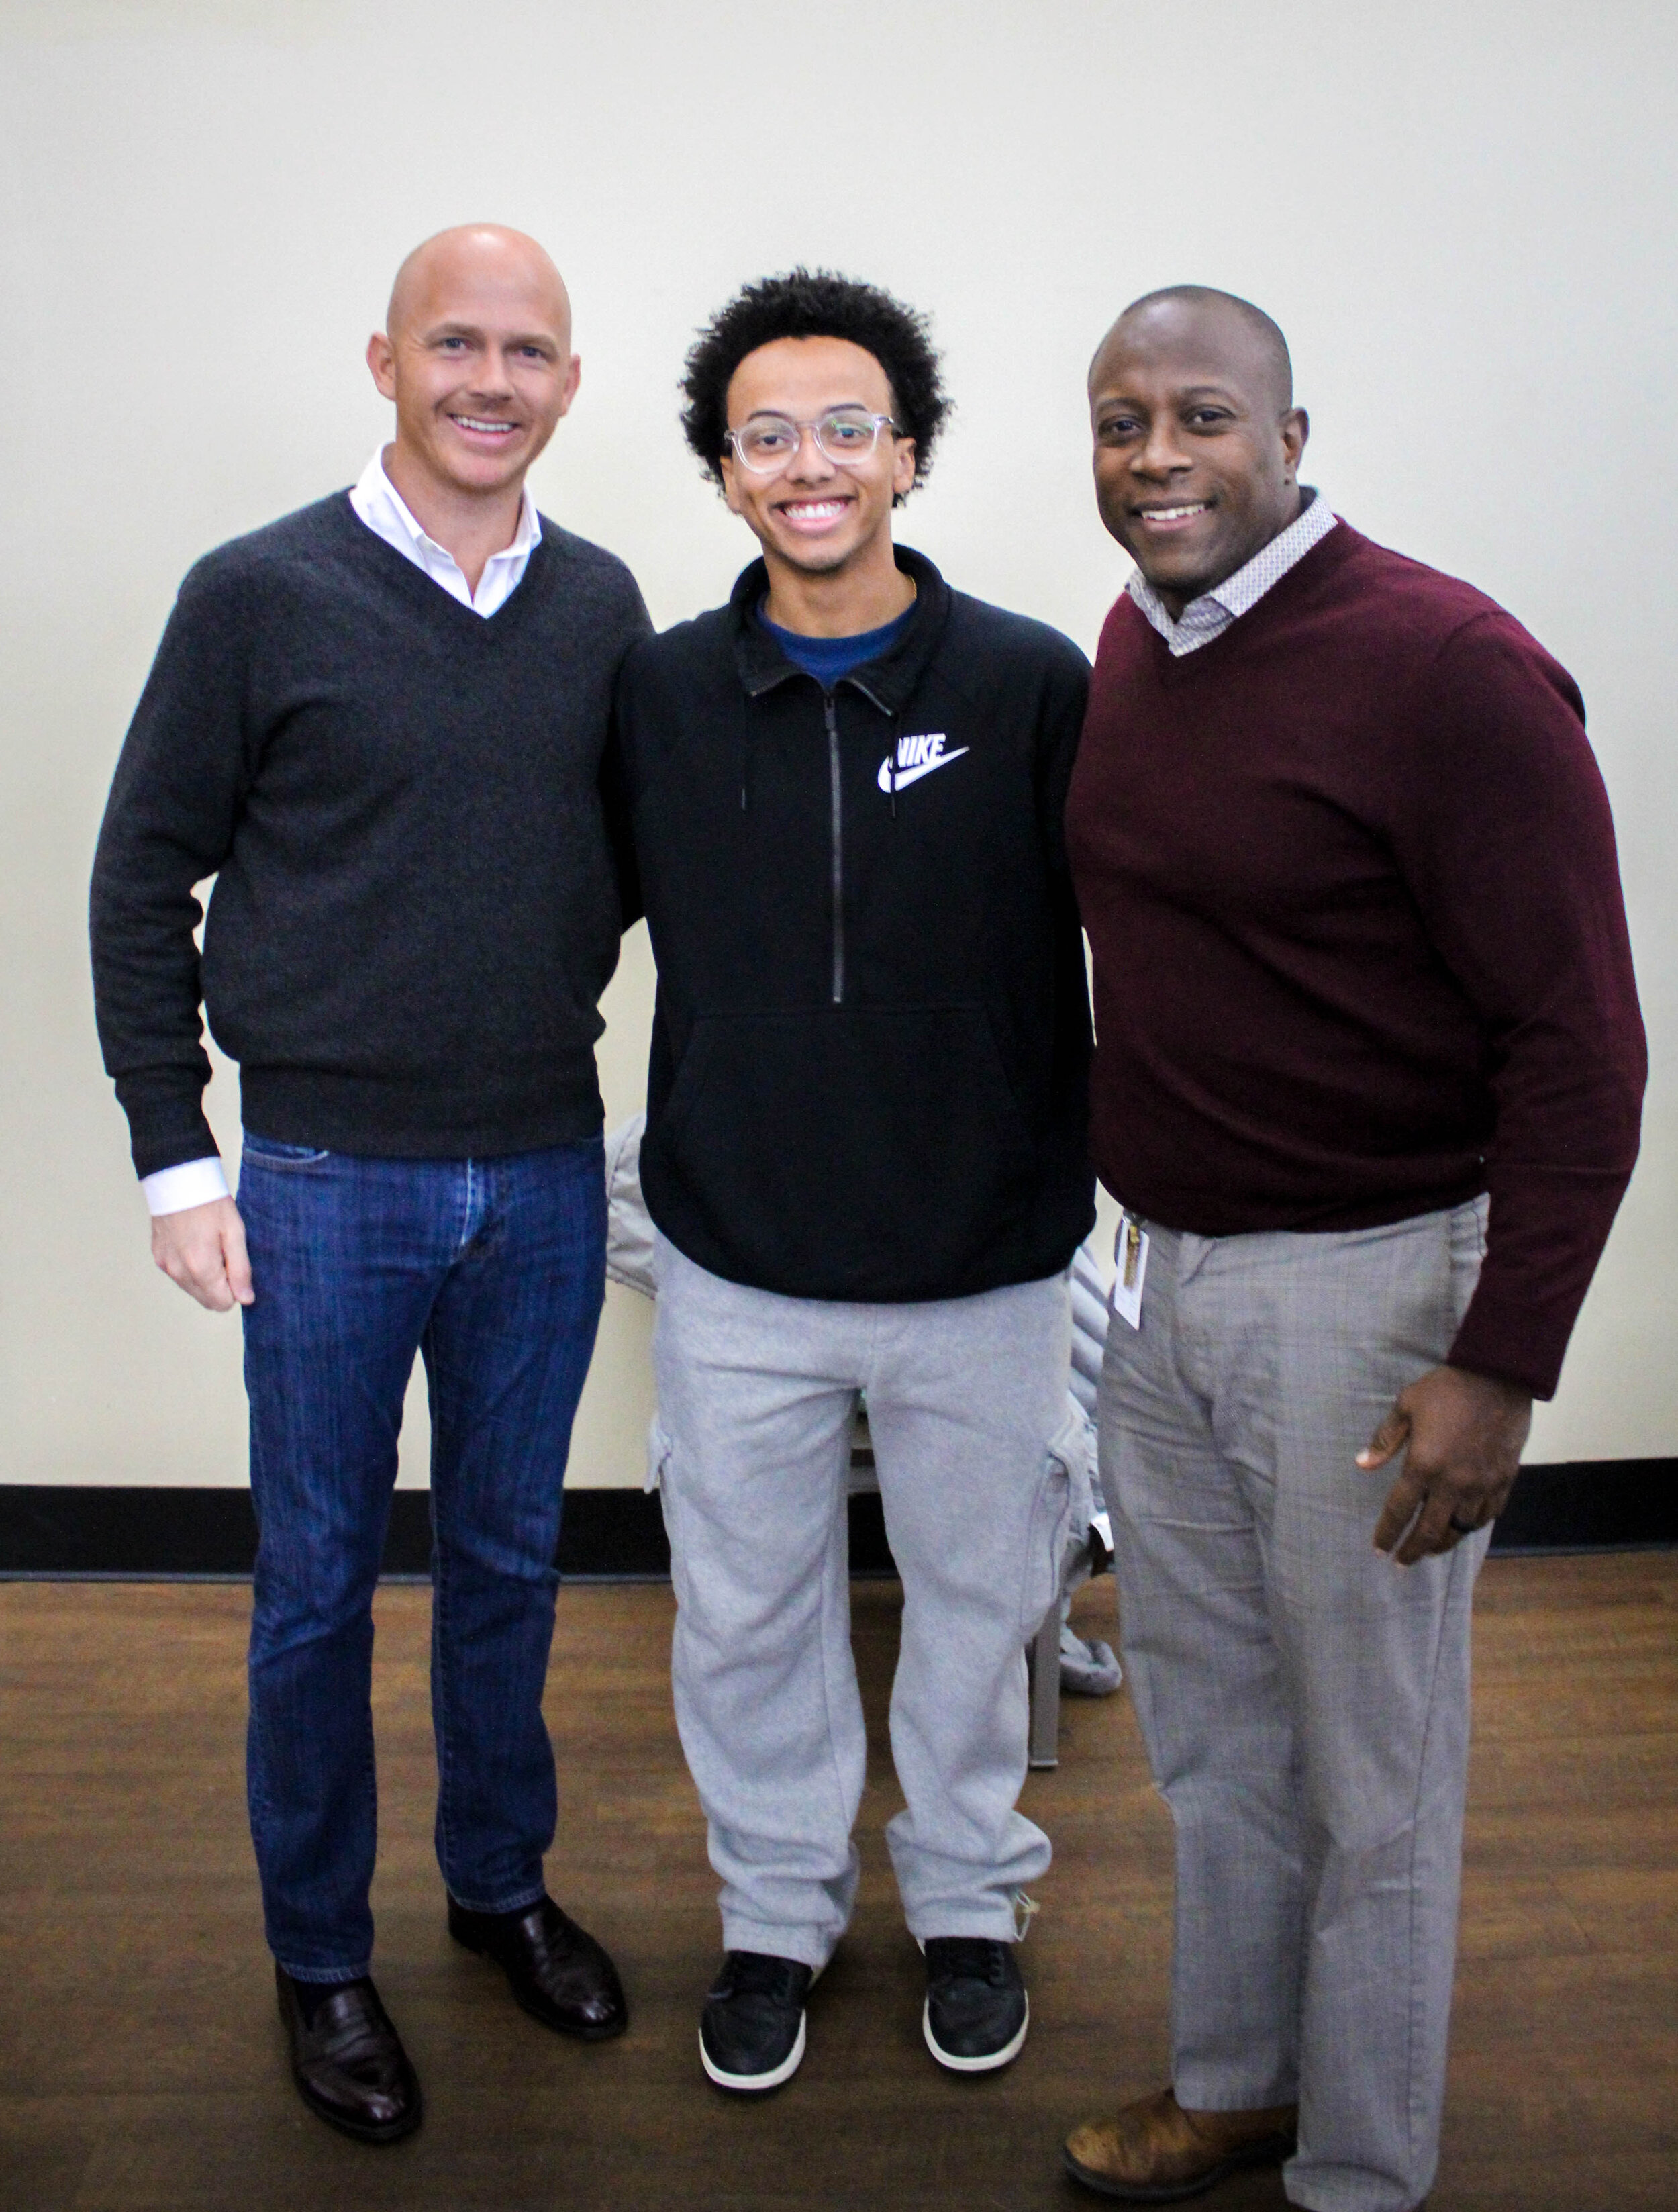 Isaac Landon, a North Greenville University student, and Lamont Sullivan, NGUs director of alumni engagement, talk with Timmons and take a photo after the meeting.